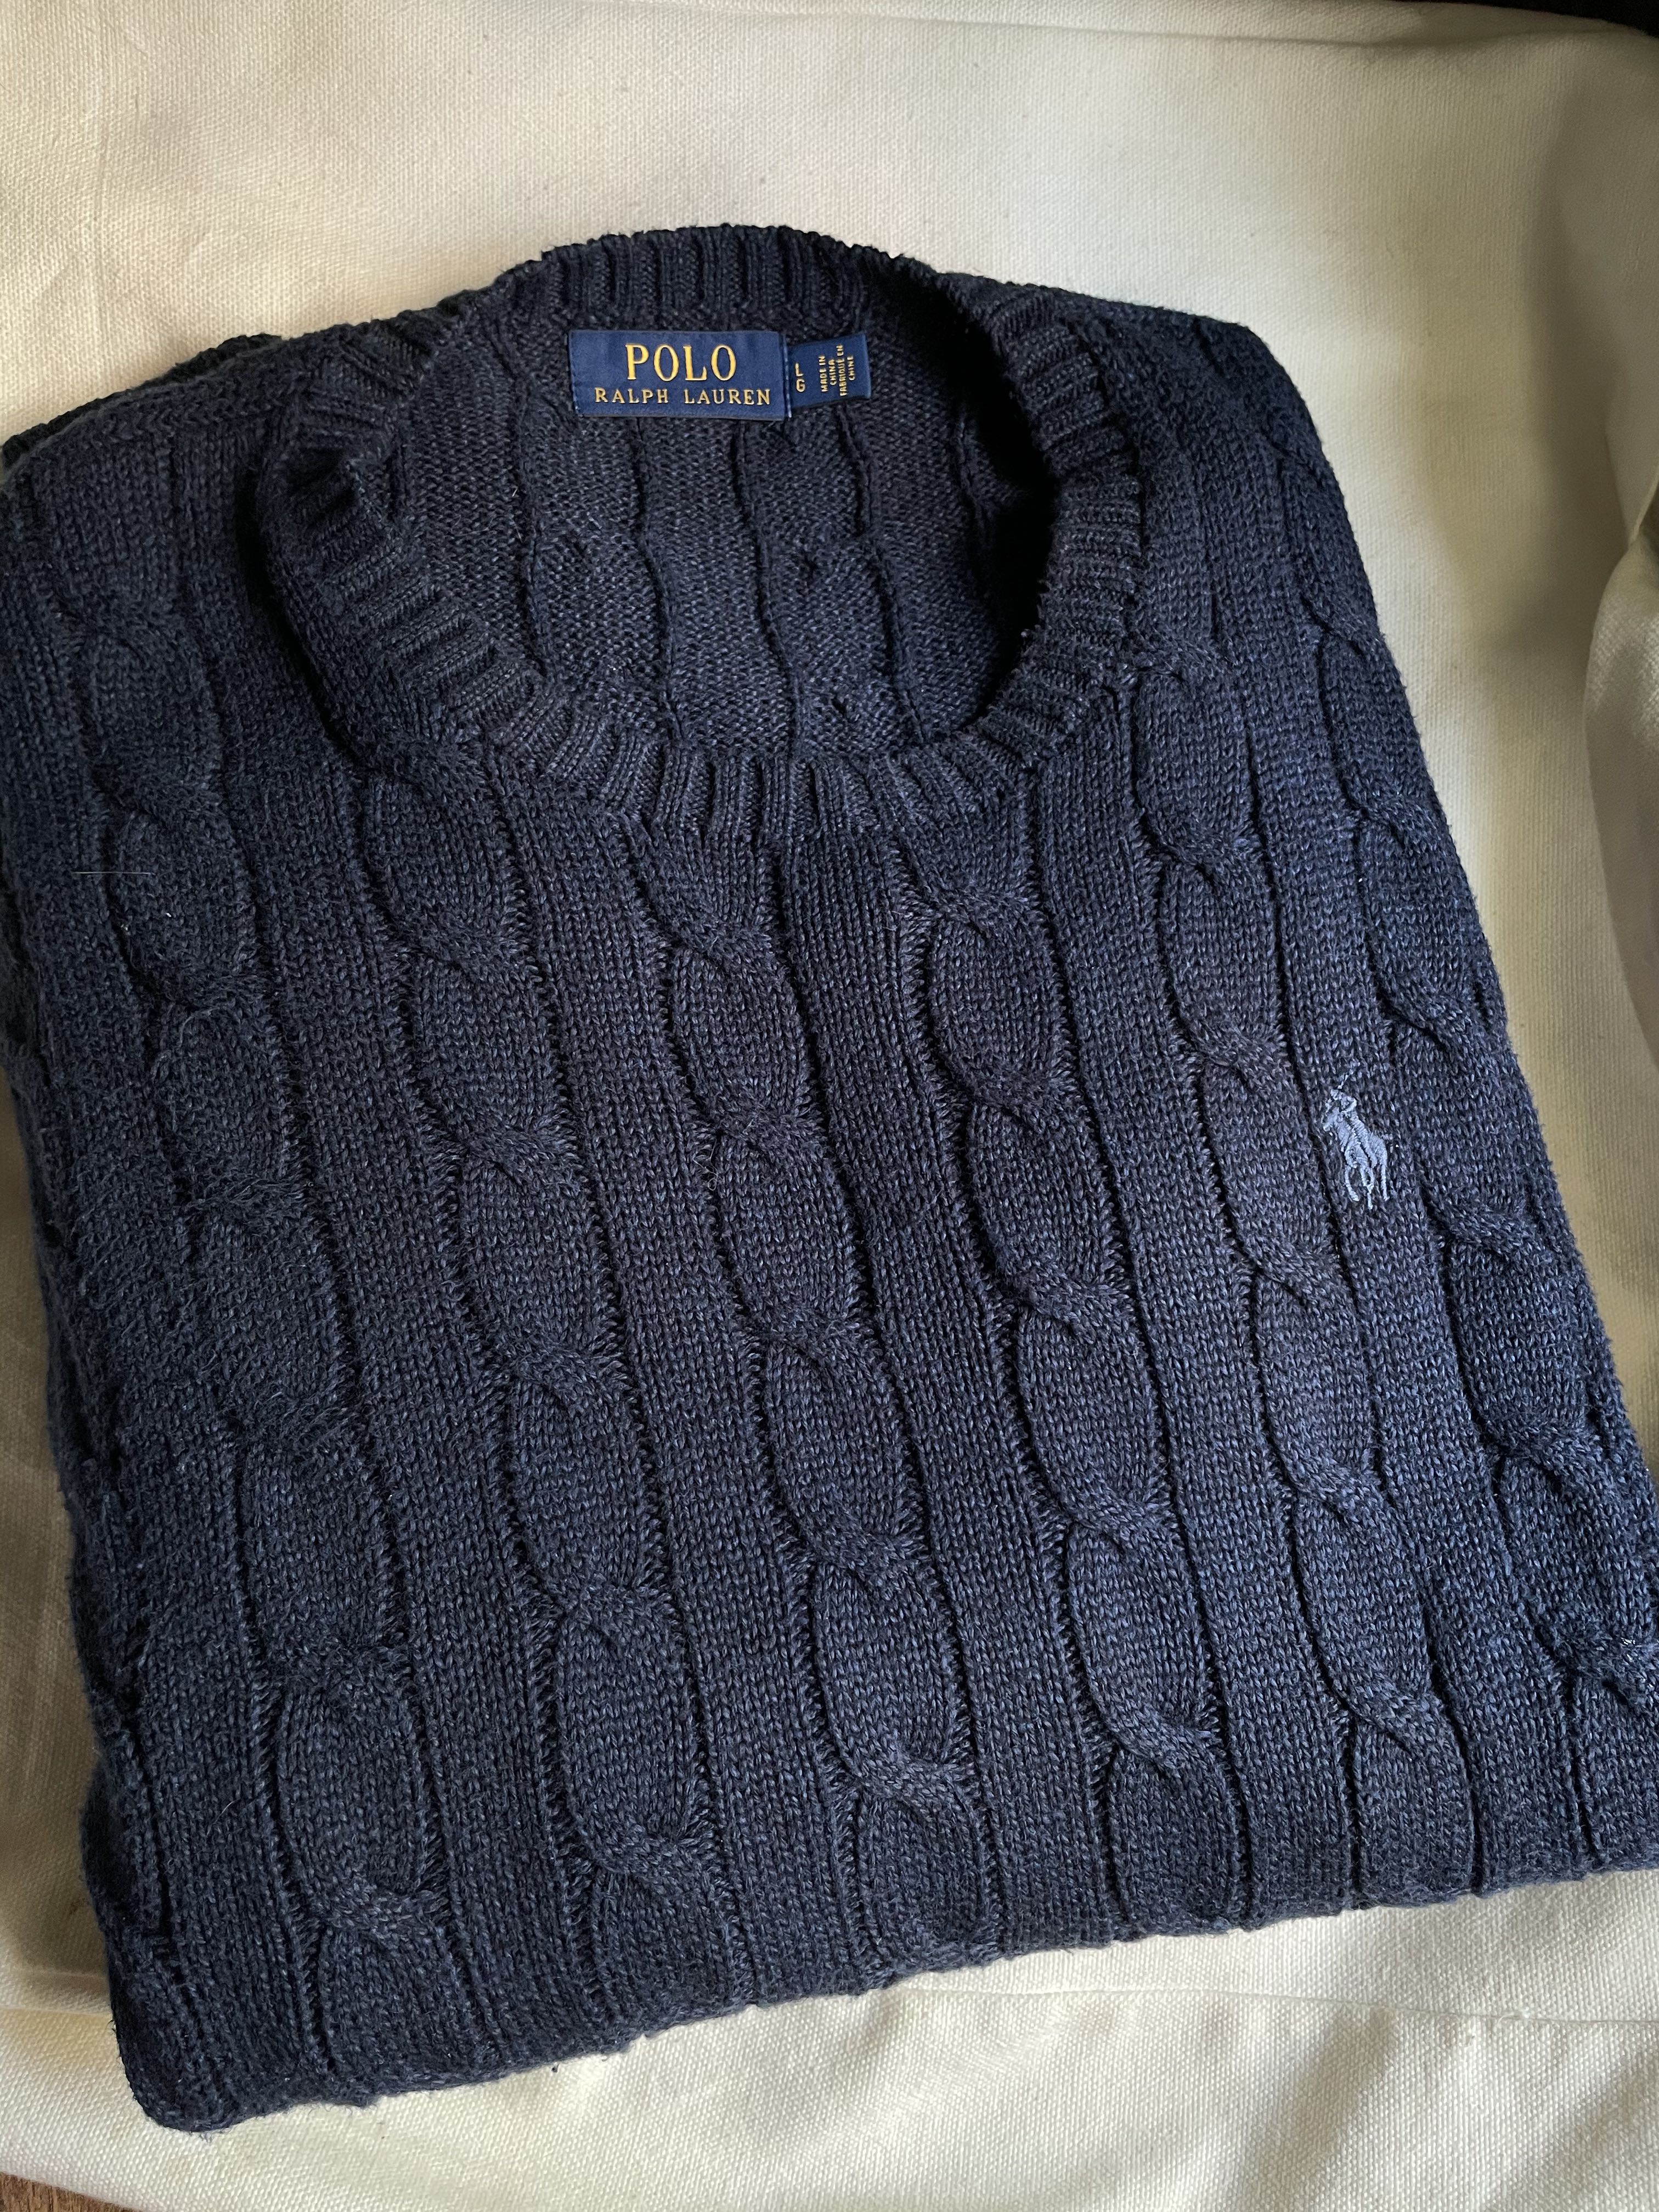 Polo Ralph Lauren Cable Knit Sweater, Men's Fashion, Coats, Jackets and  Outerwear on Carousell